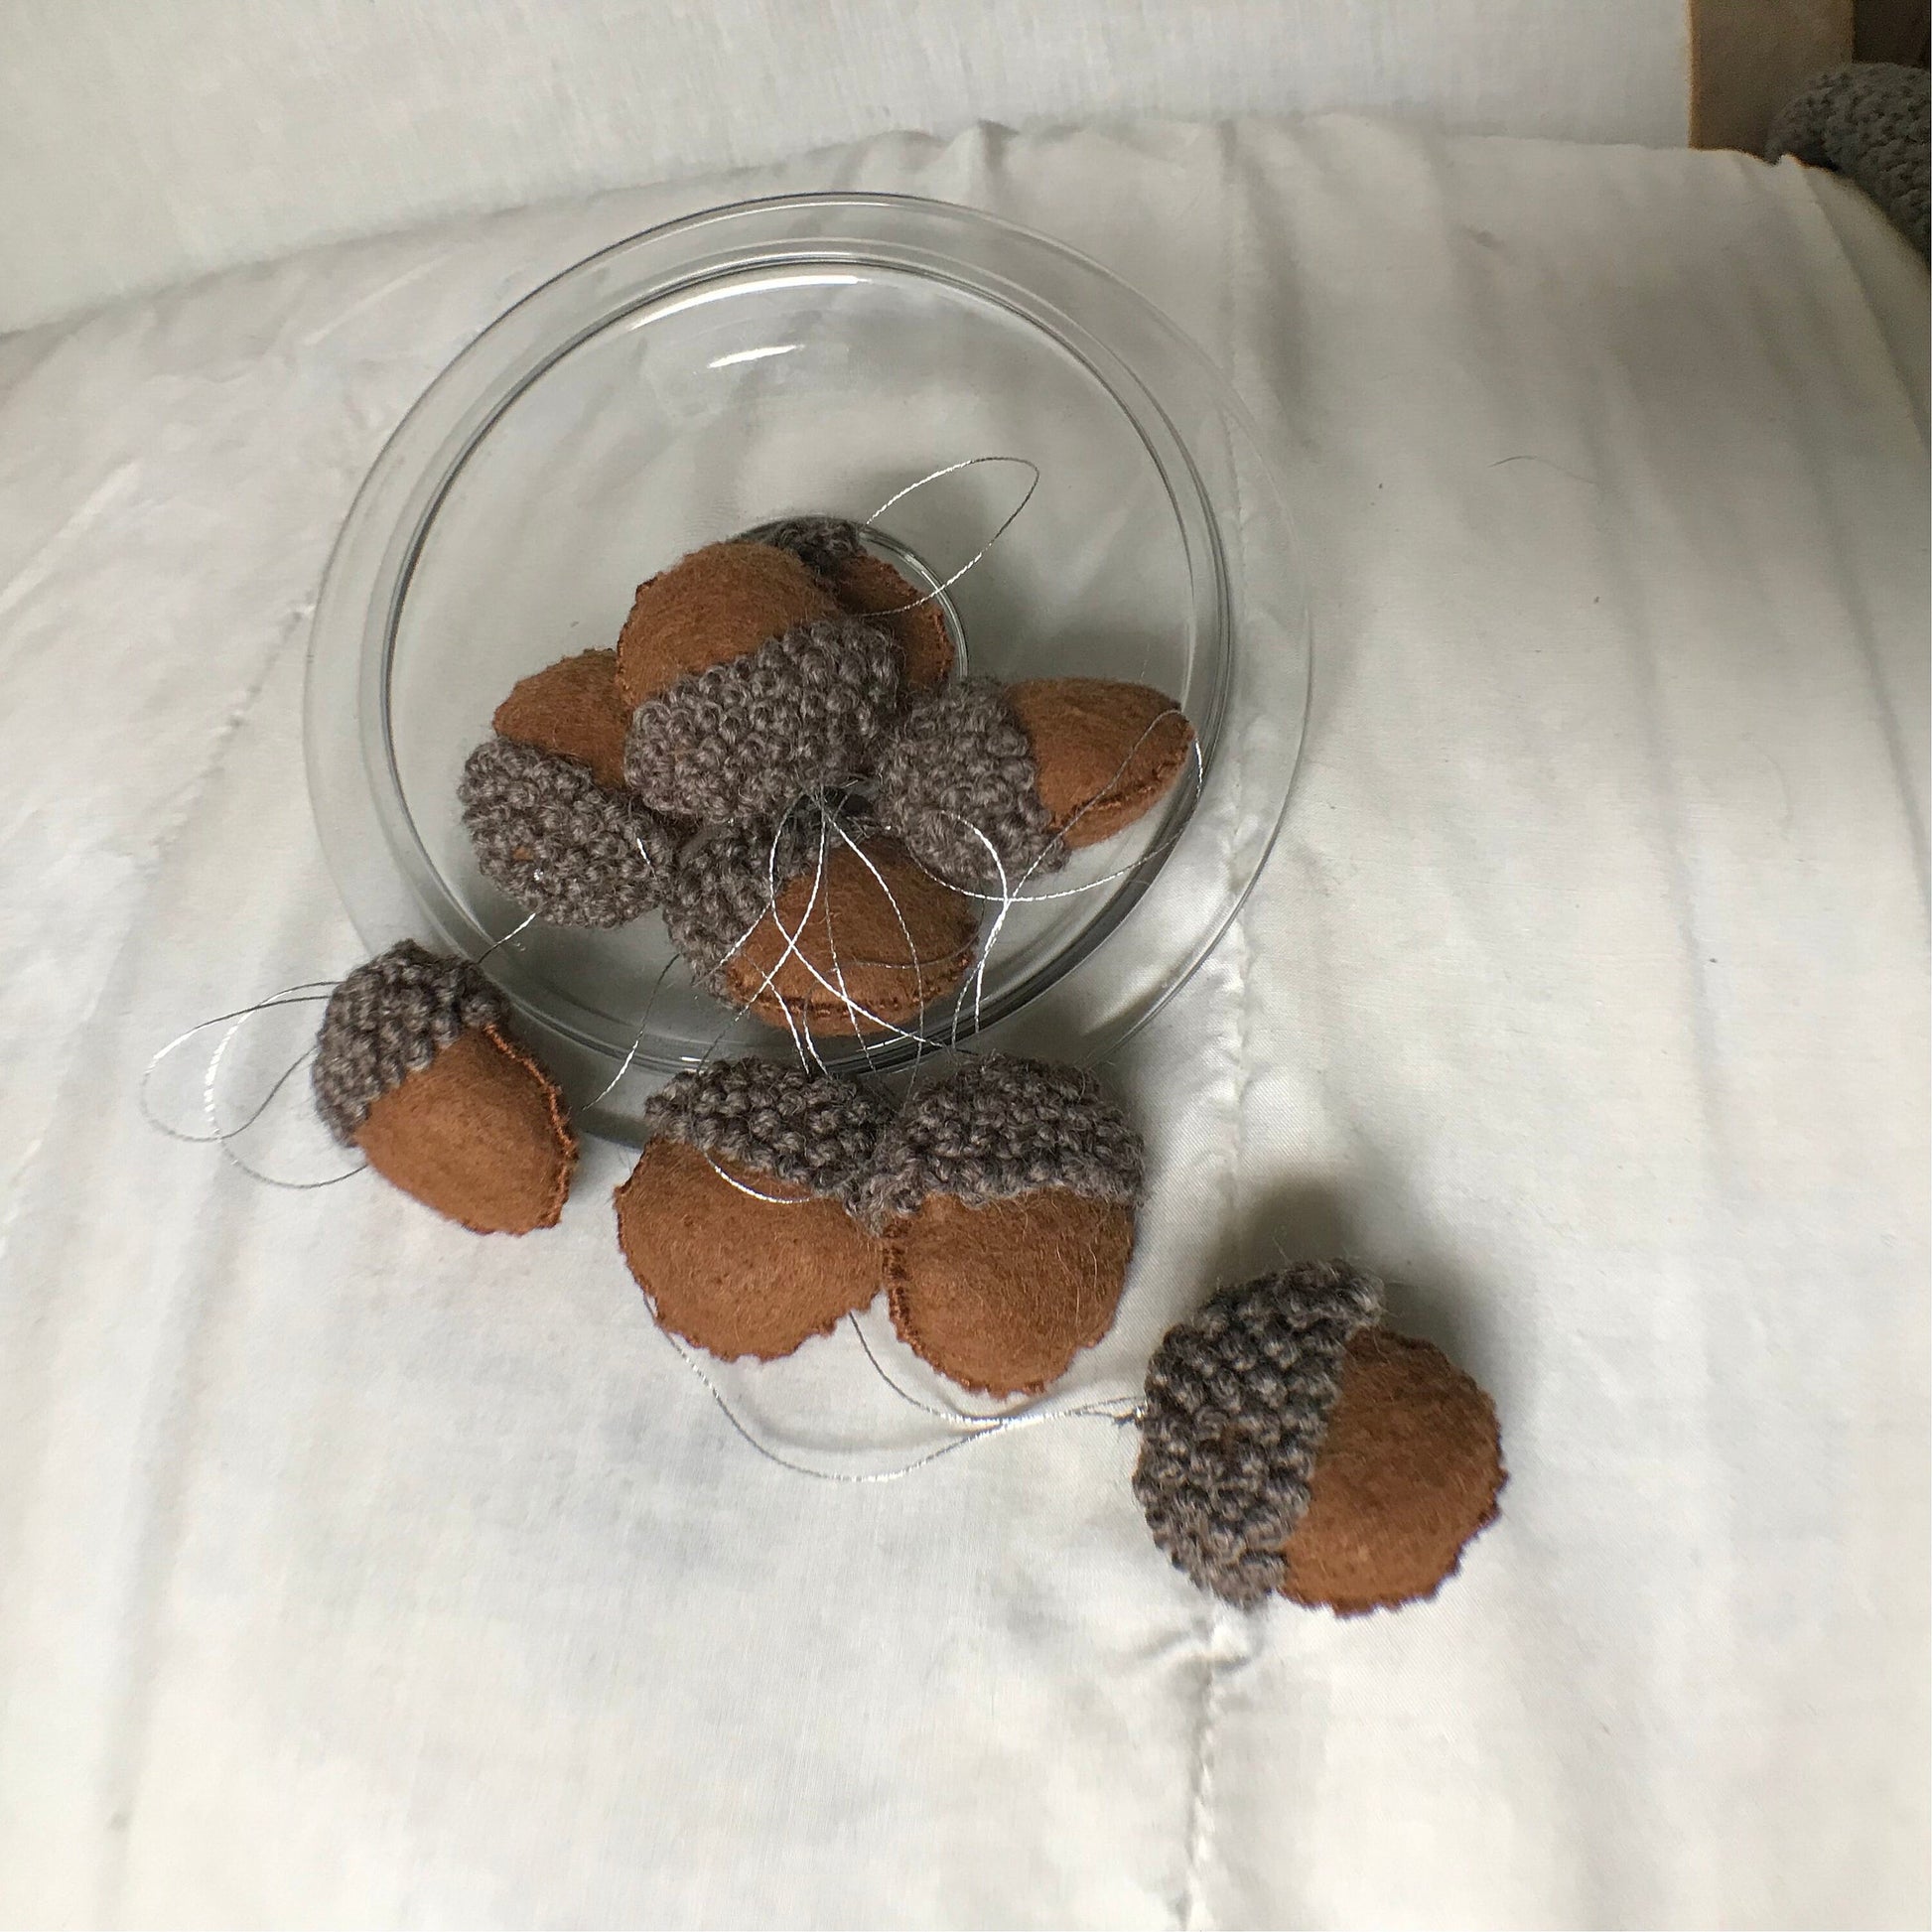 MULTIPLE ACORN EMBROIDERED ORNAMENT SPILLING OUT OF GLASS BOWL